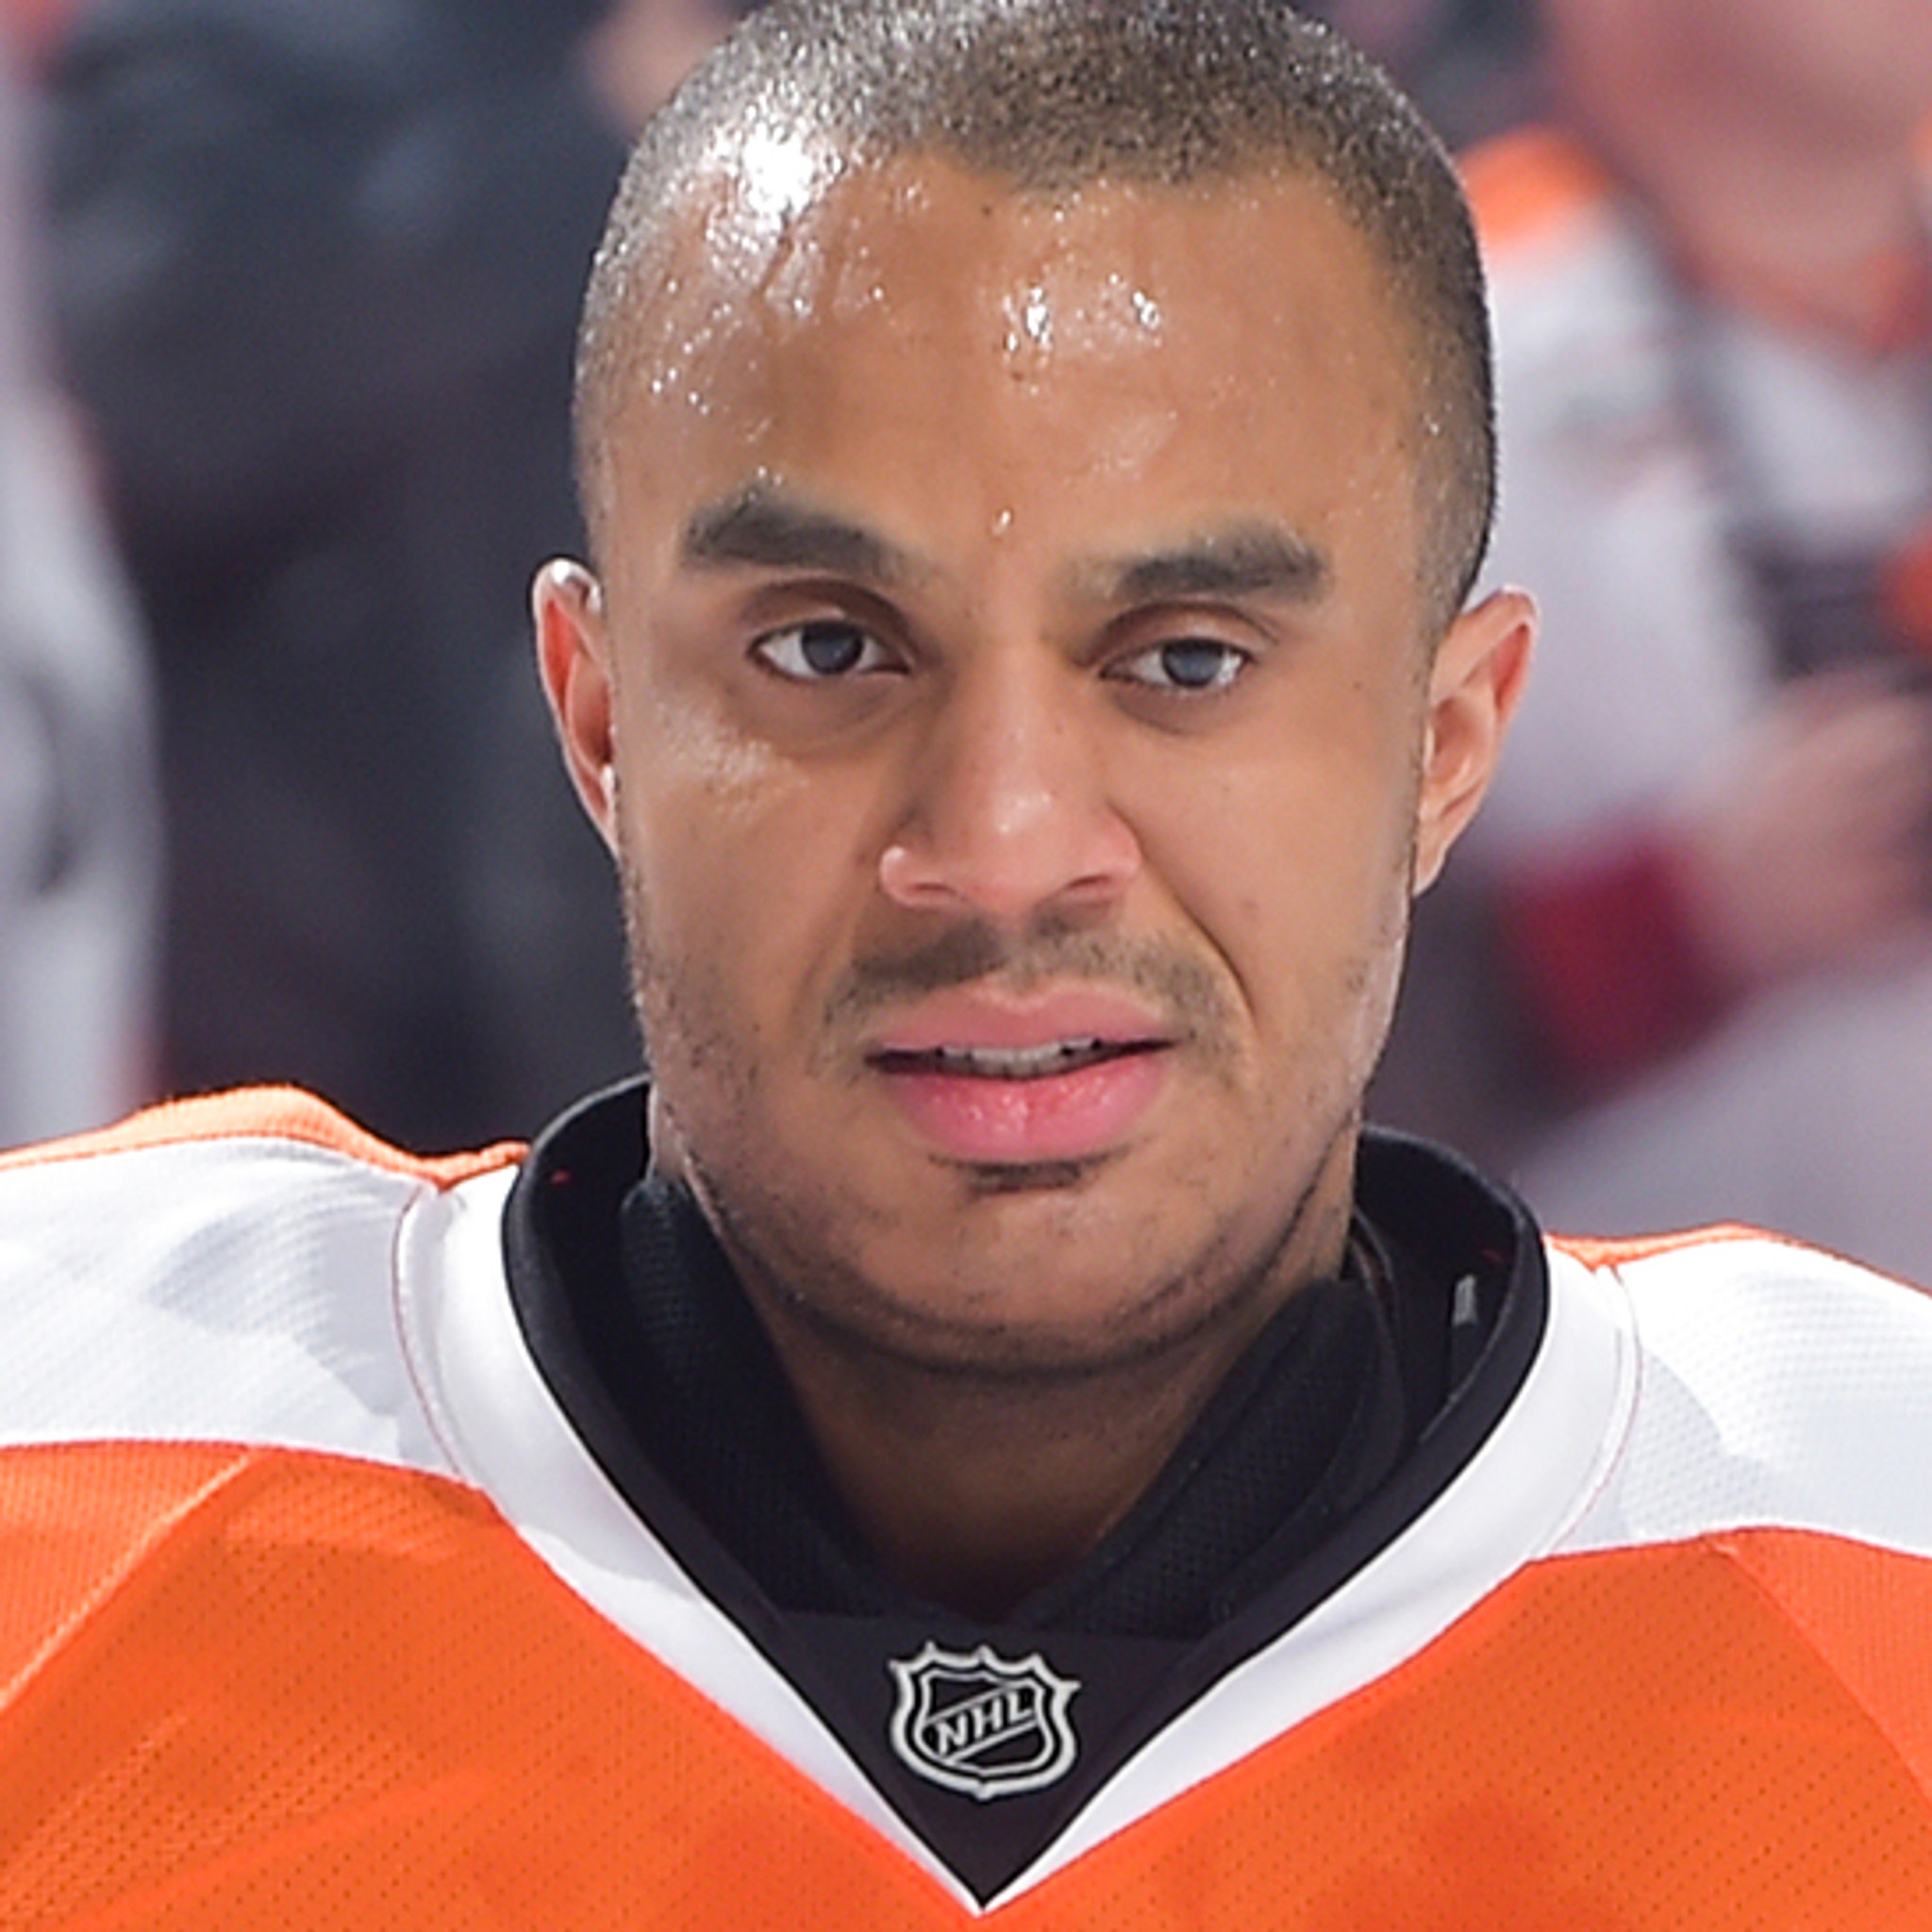 Ray Emery, 35, NHL goalie known for aggressive style - The Boston